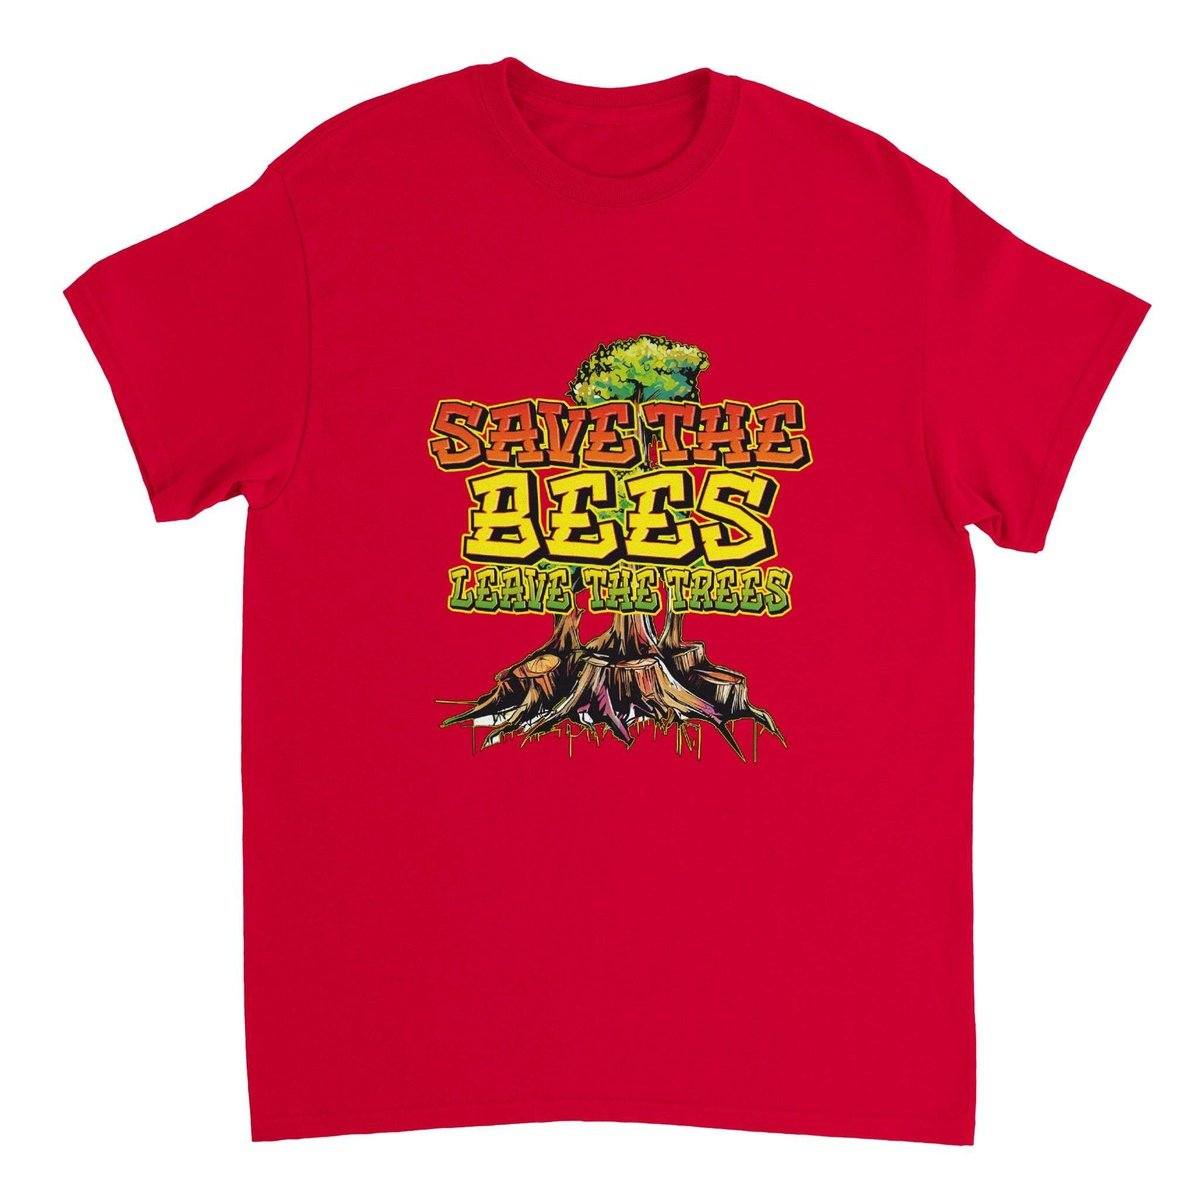 Save The Bees Tshirt - Leave The Trees - Stumps - Unisex Crewneck T-shirt Australia Online Color Red / S